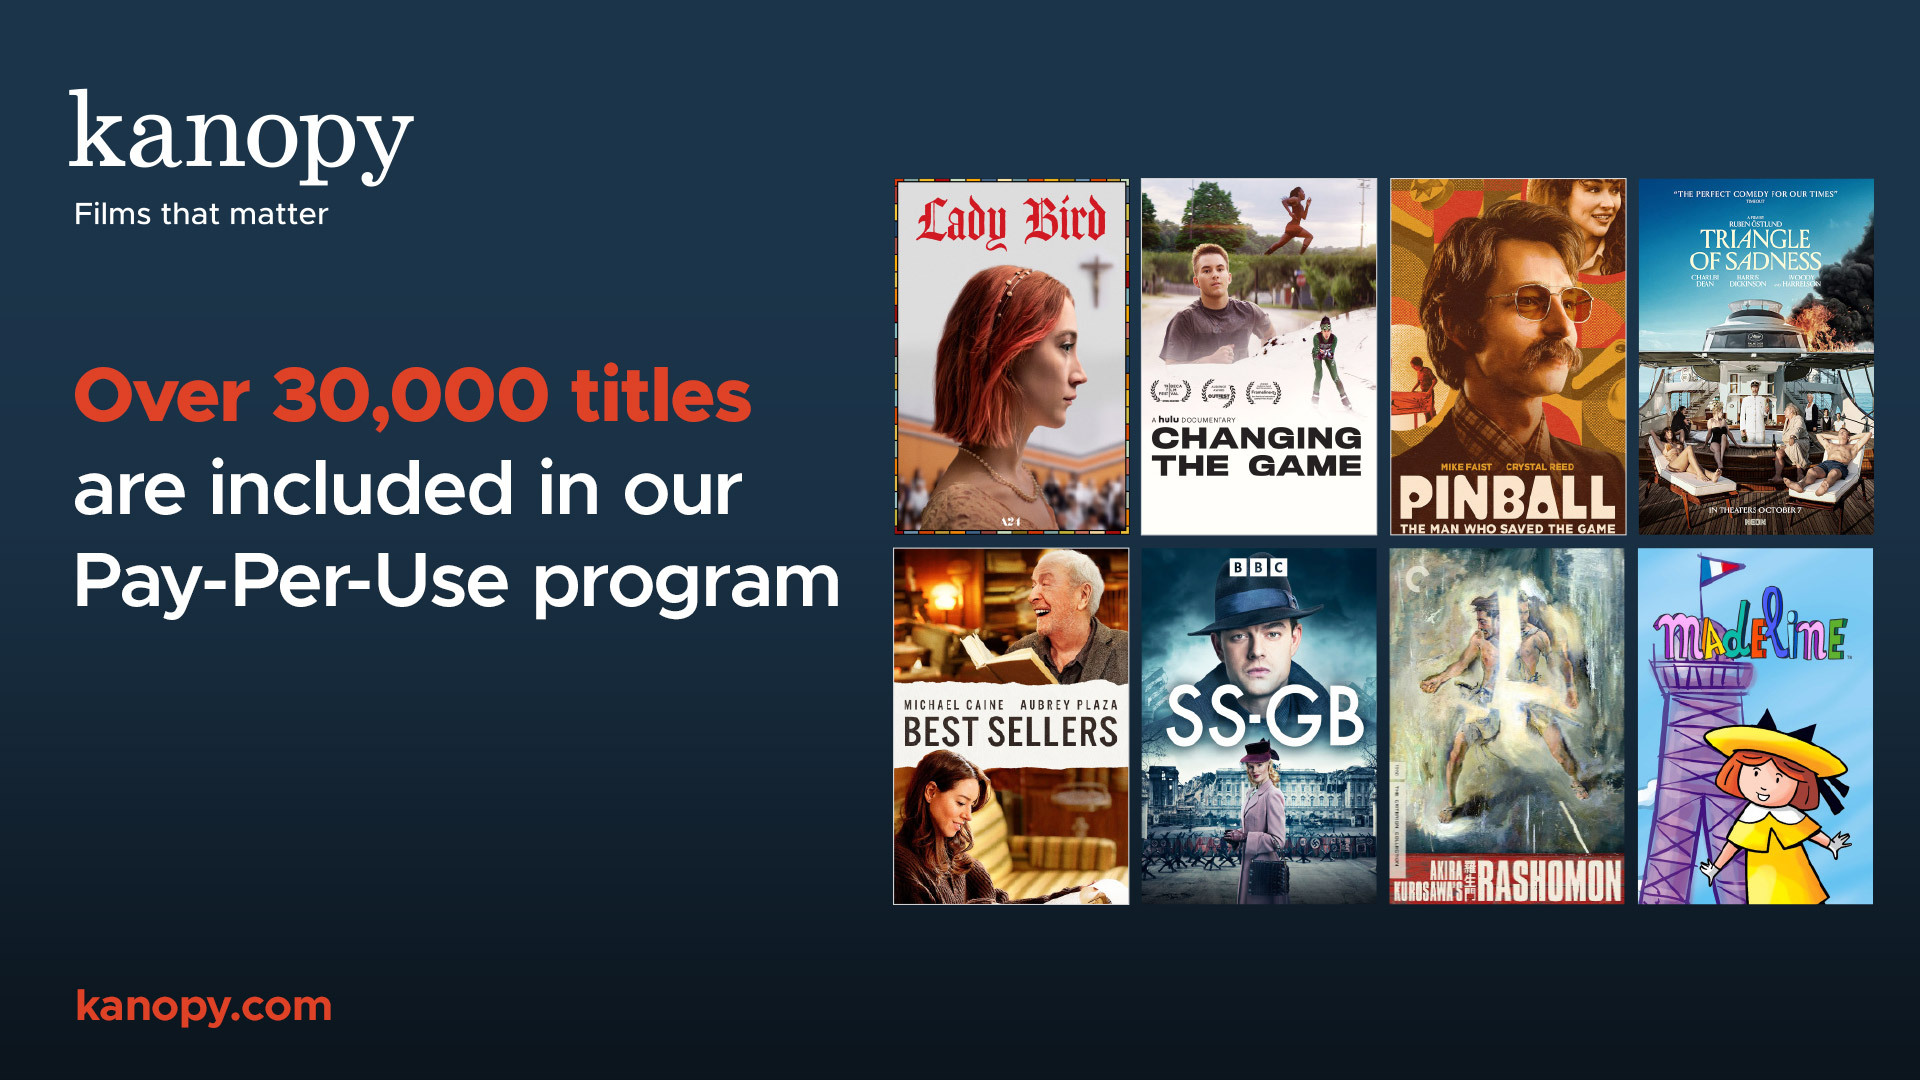 Over 30,000 titles are included in the pay per use program